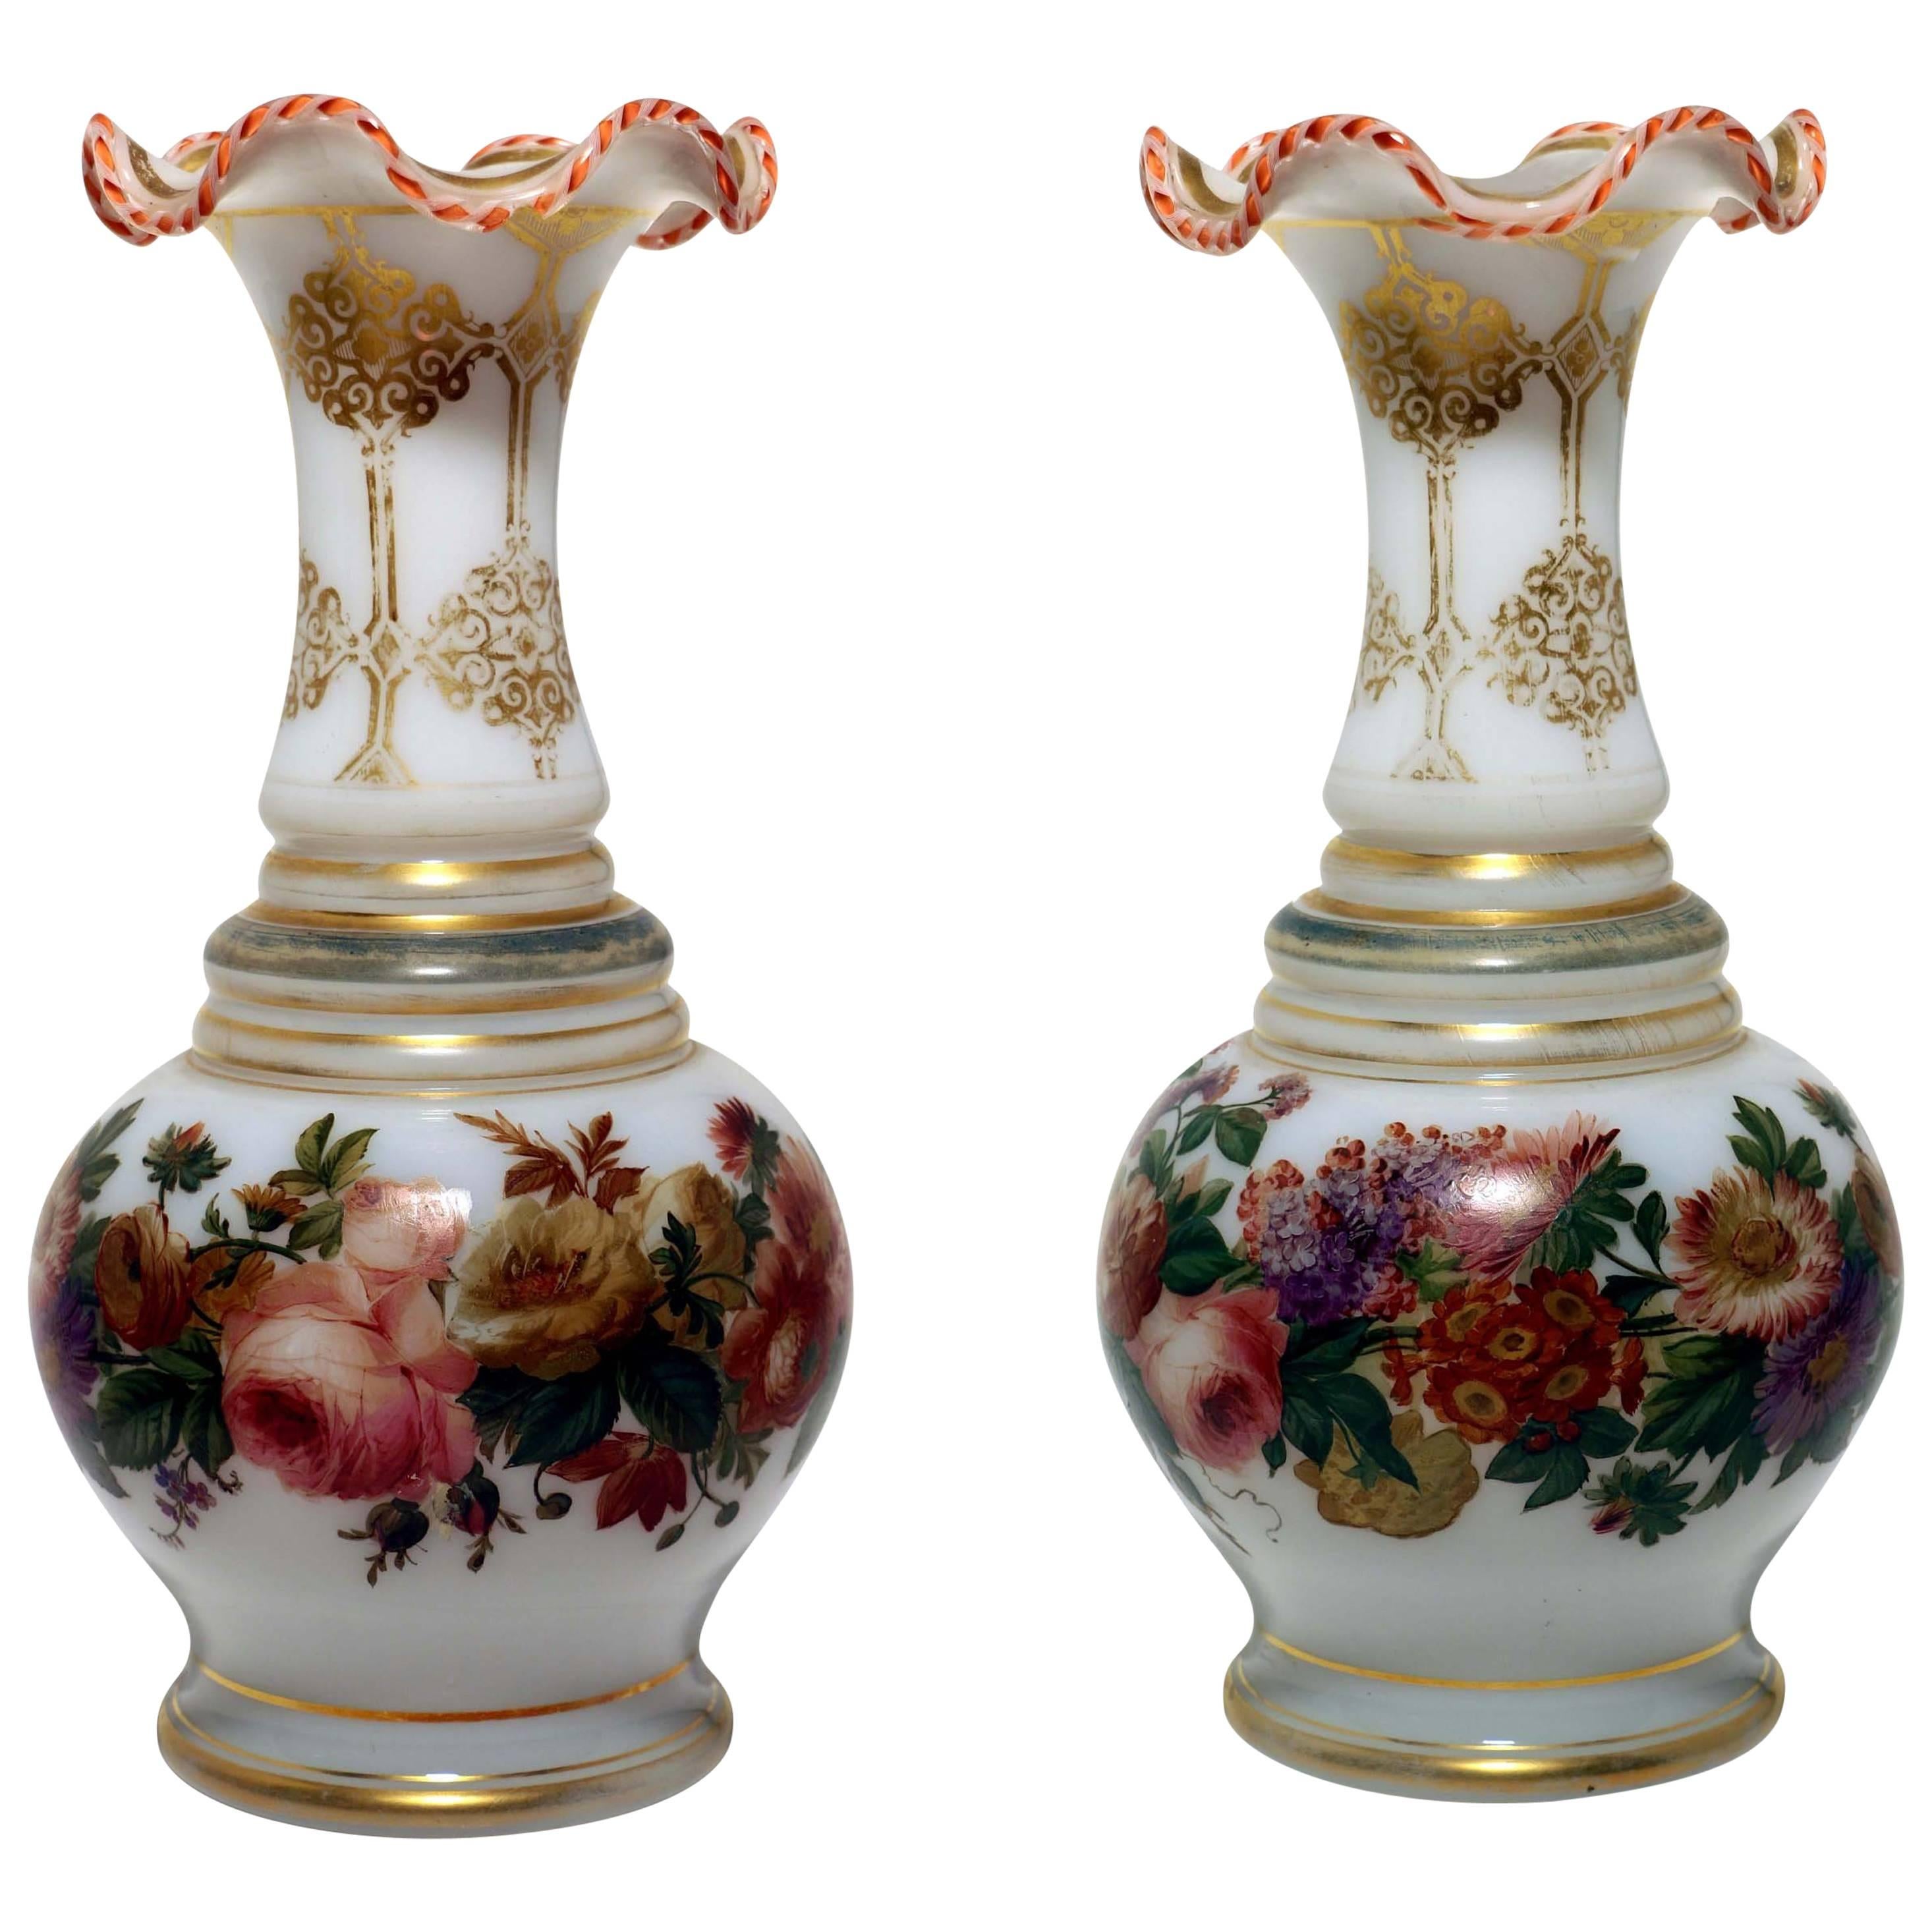 Pair of White Opeline Baluster Vases with Floral Band and Gilt